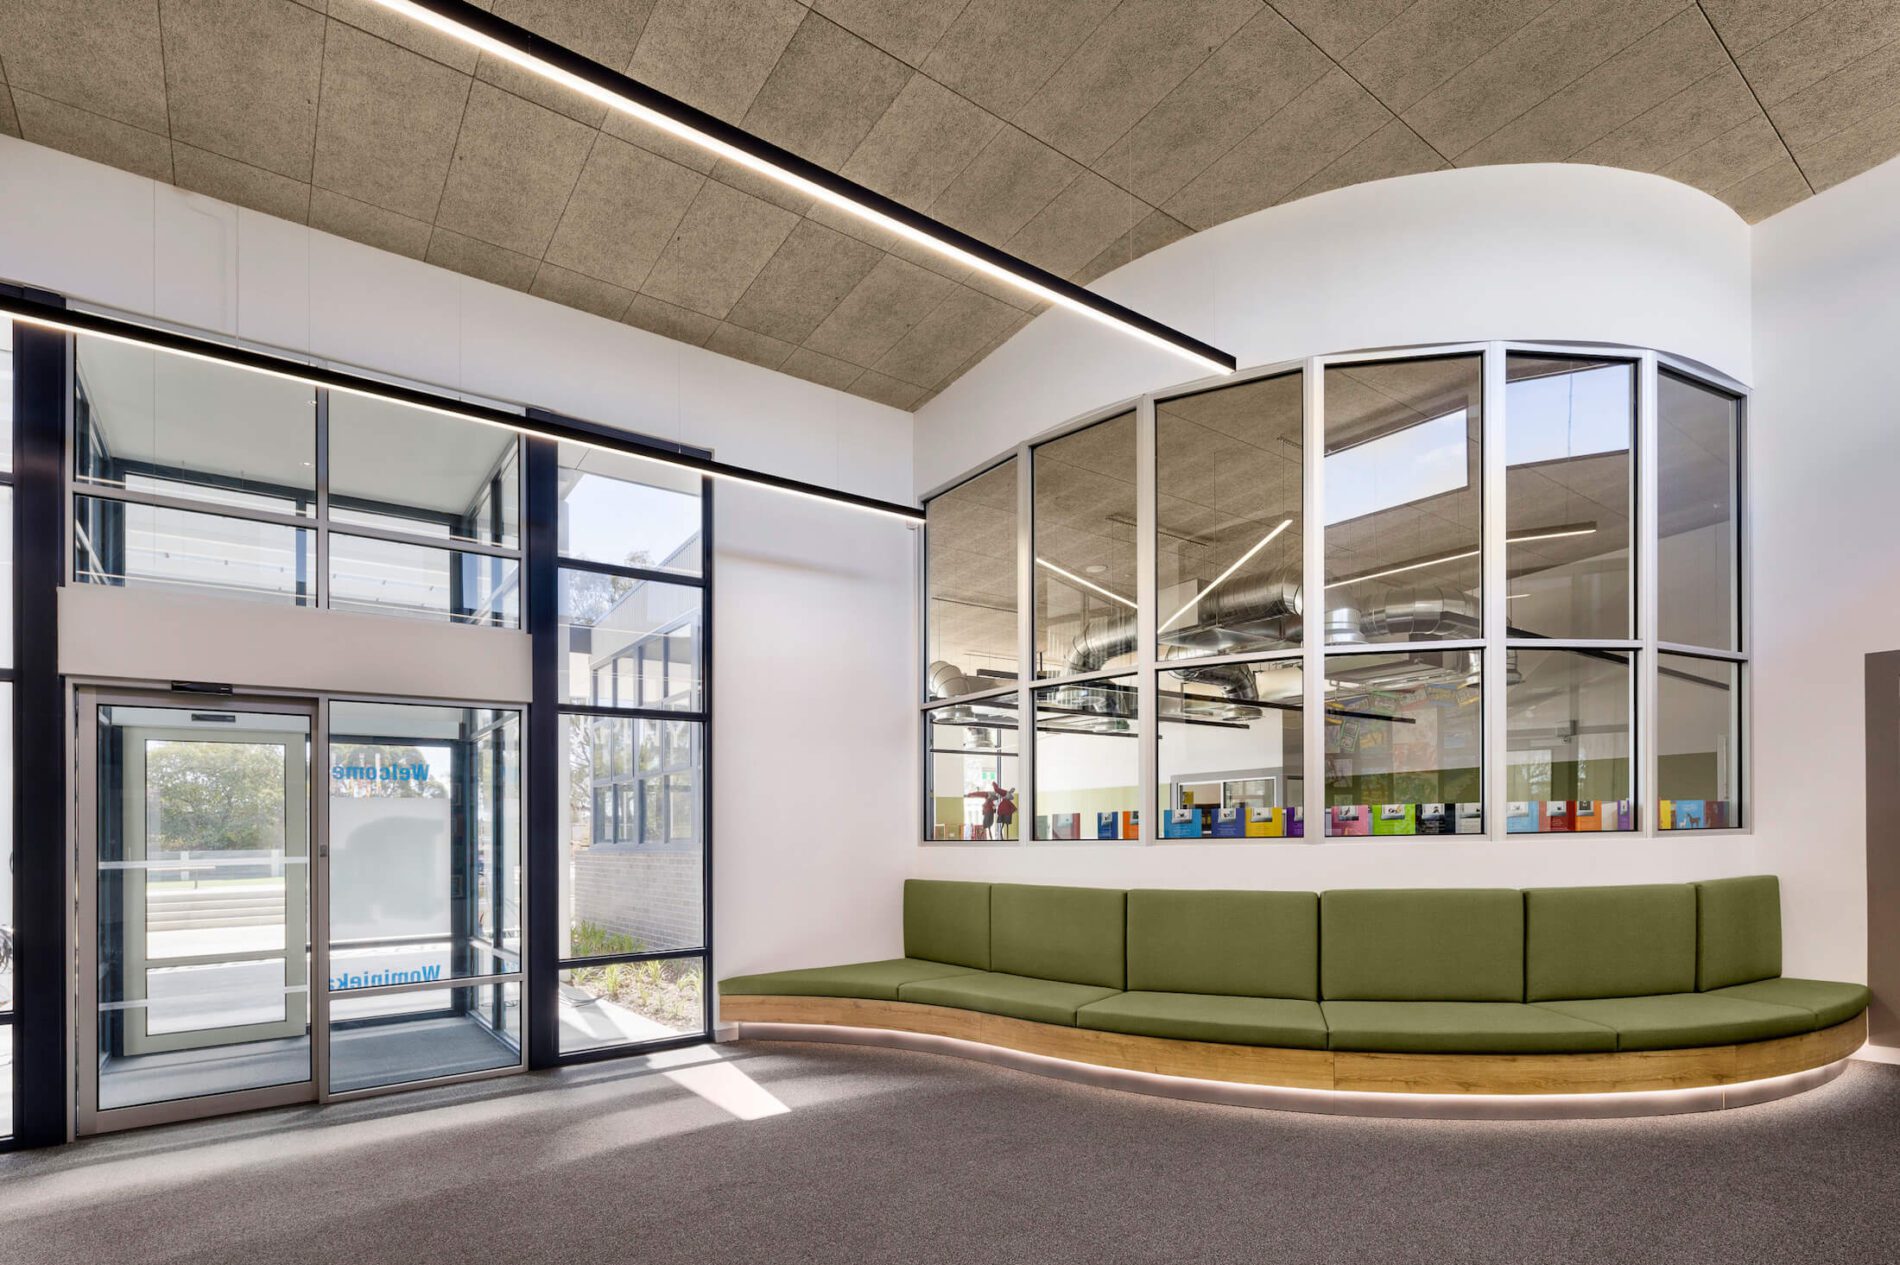 Curved green banquette seating in school administration entry with strip lighting above.